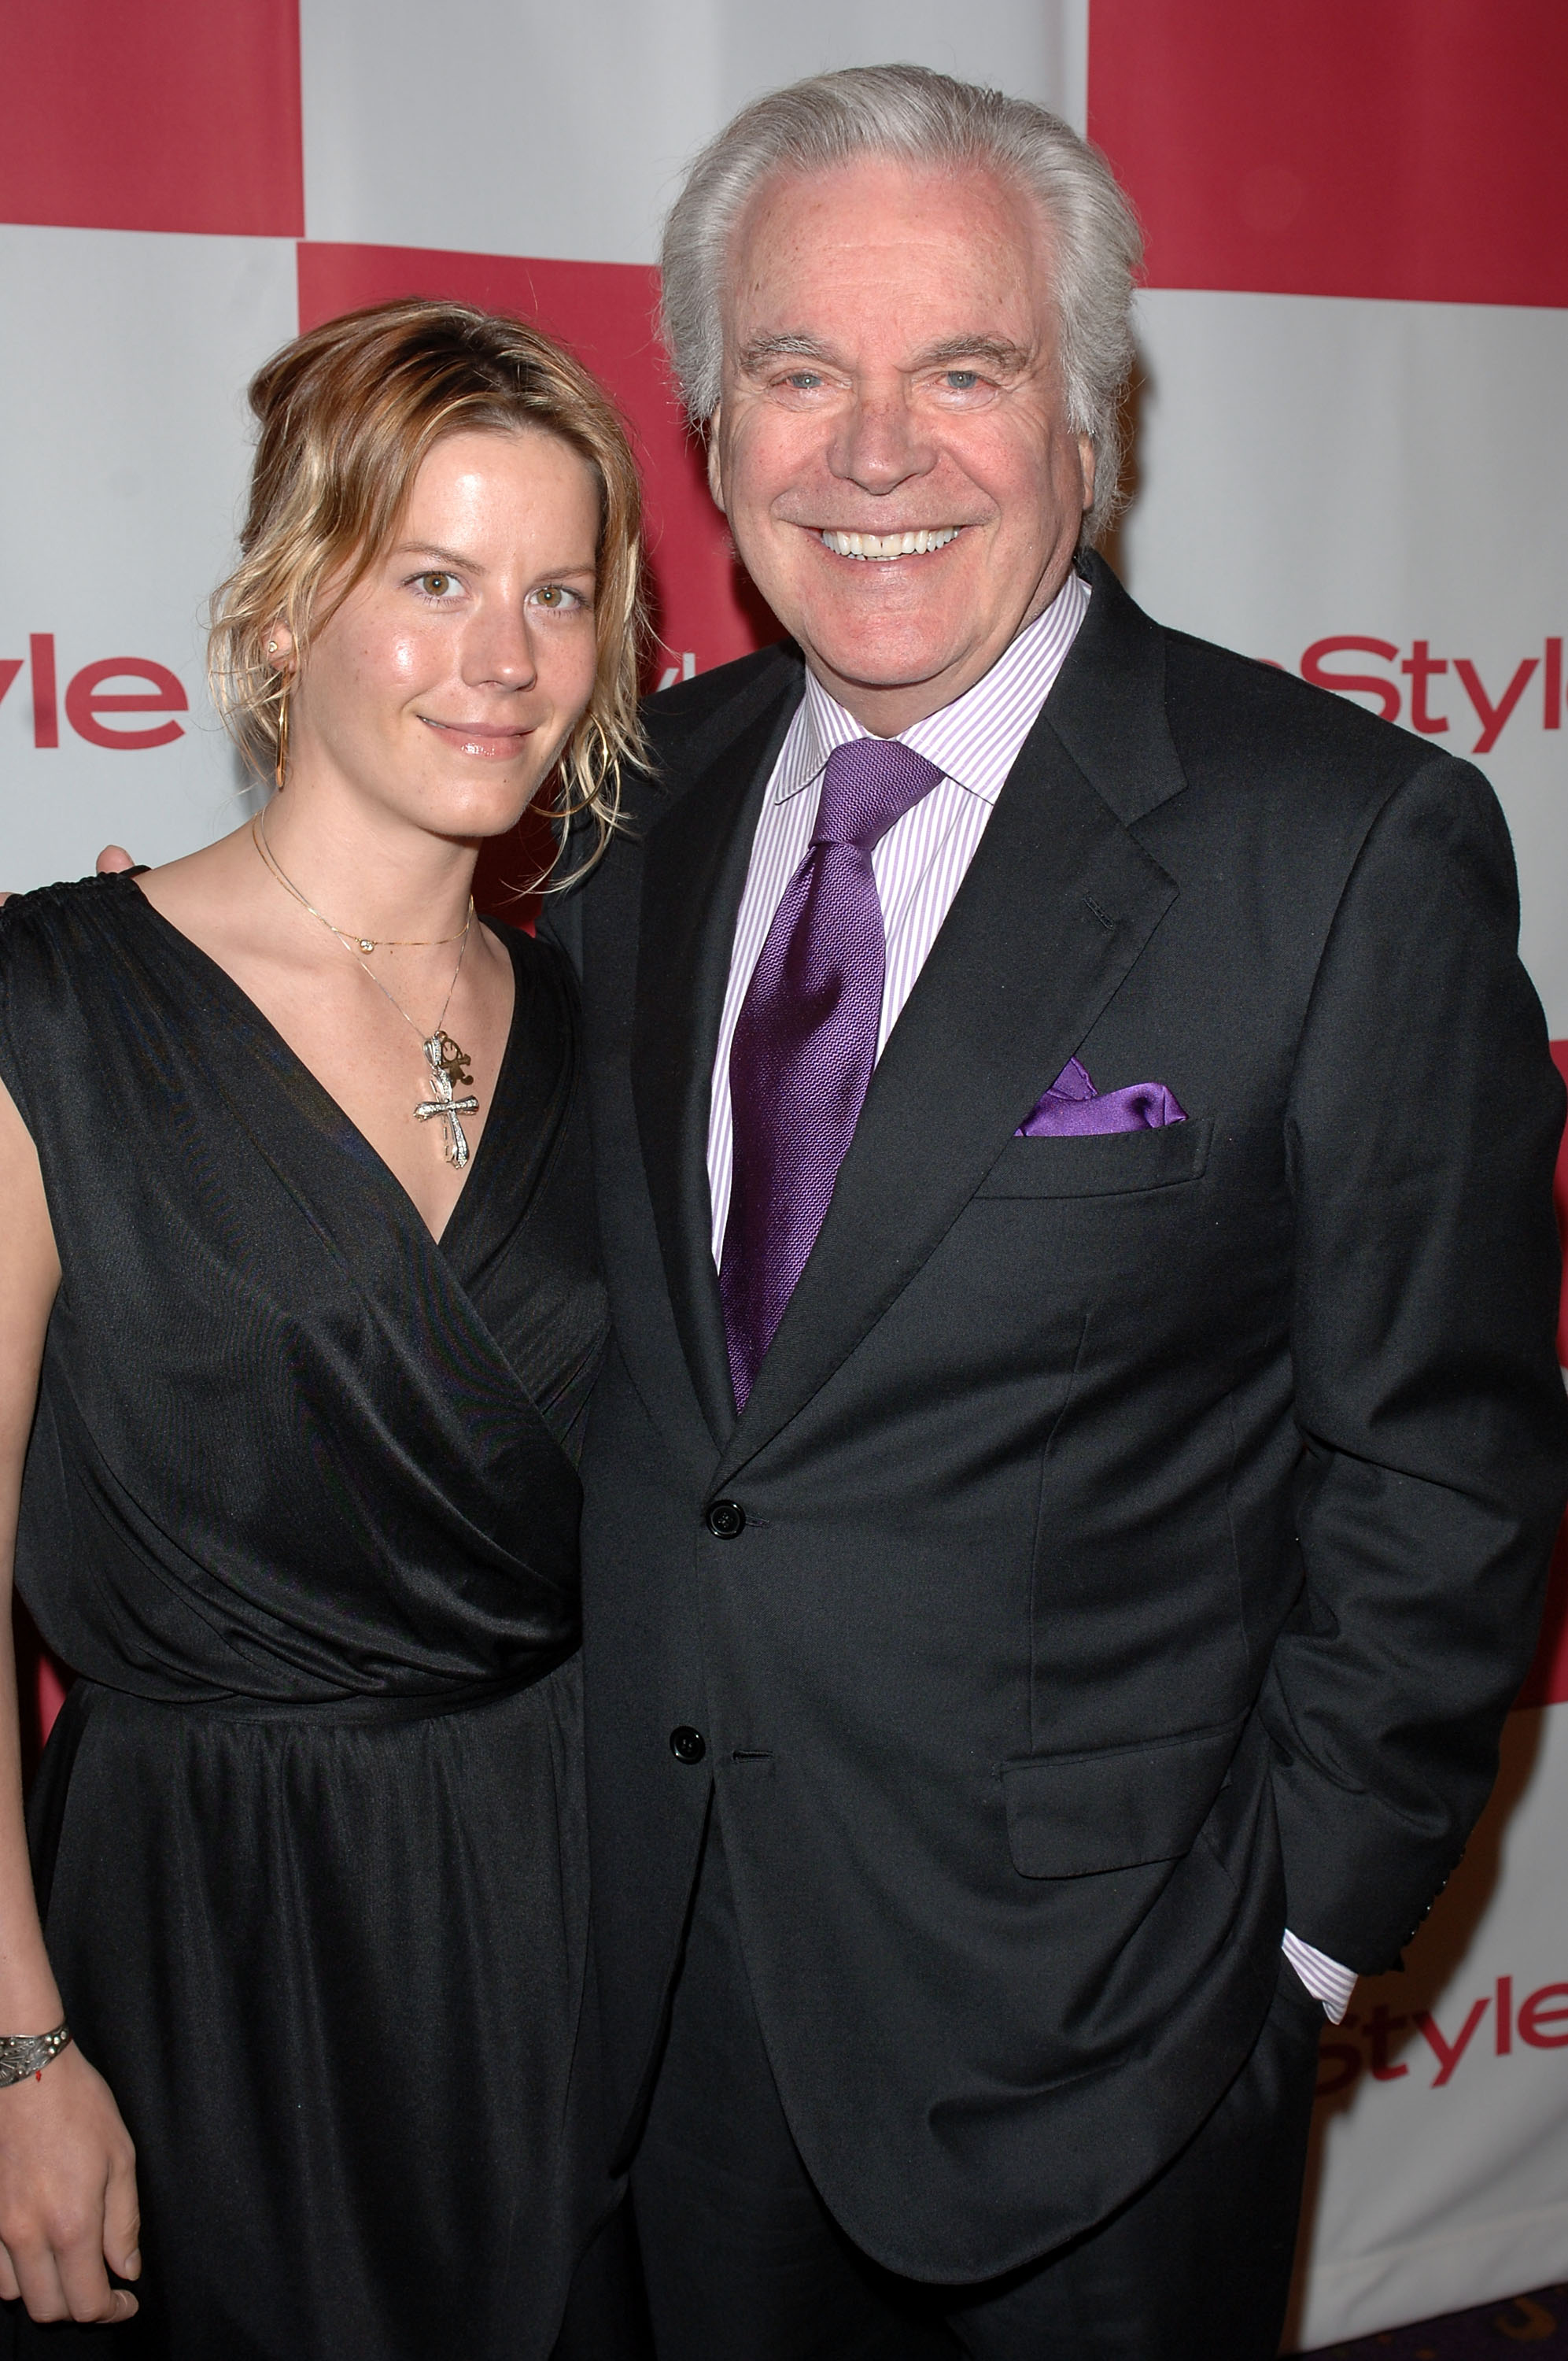 Actor Robert Wagner (R) and daughter Courtney Wagner attend the In Style party celebrating the publication of Joyce Ostin's book "A Tribute to Hollywood Dads" at Spago on May 17, 2007 in Beverly Hills, California. | Source: Getty Images